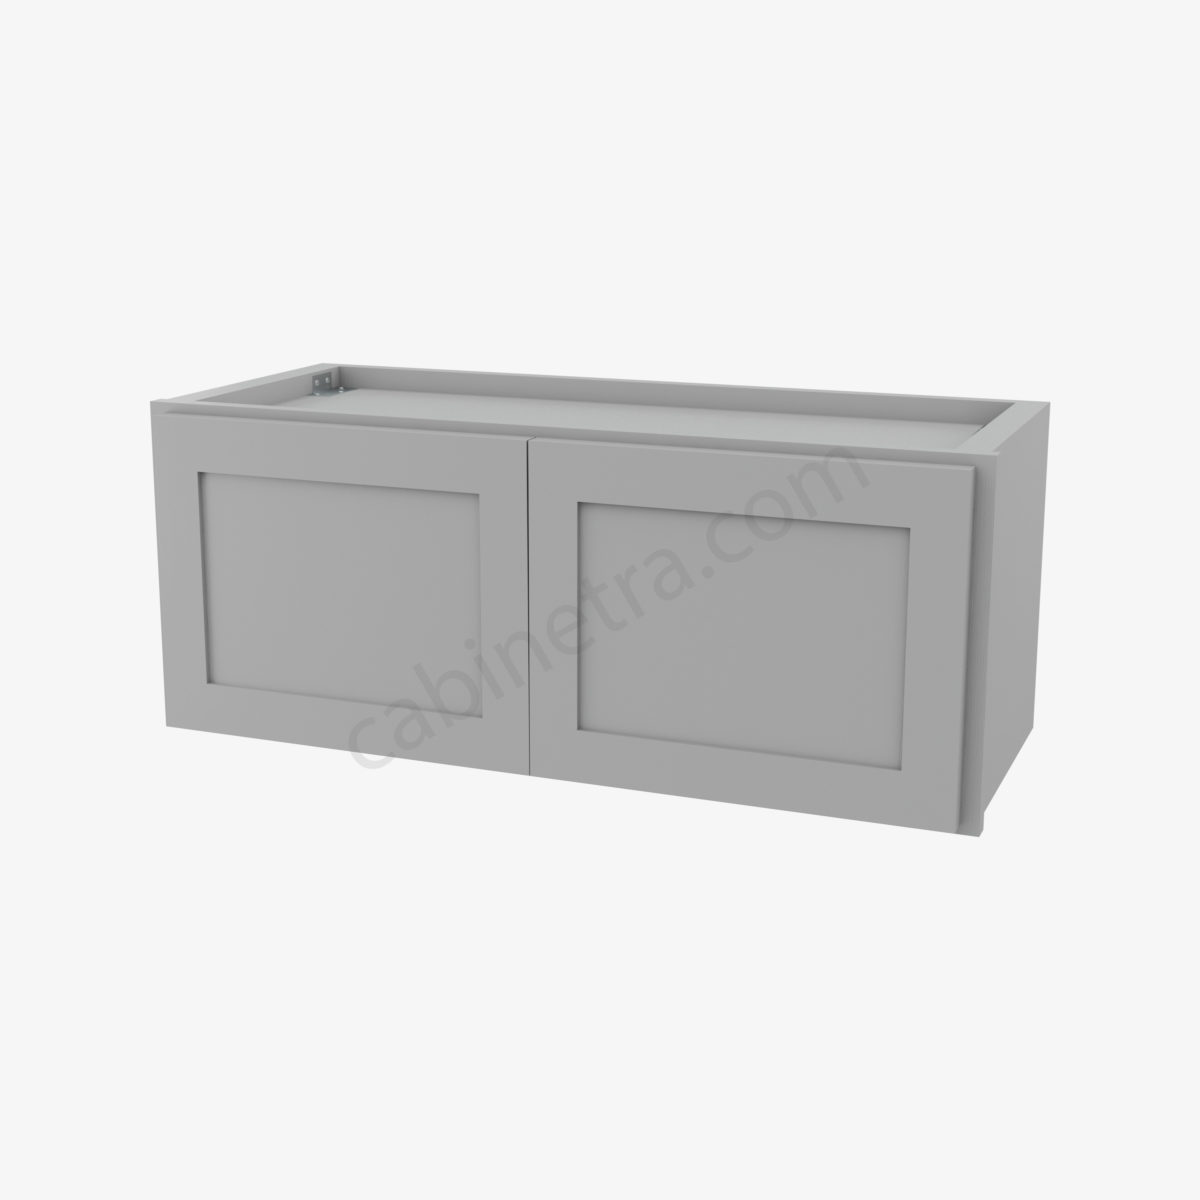 AB W3012B 0 Forevermark Lait Gray Shaker Cabinetra scaled